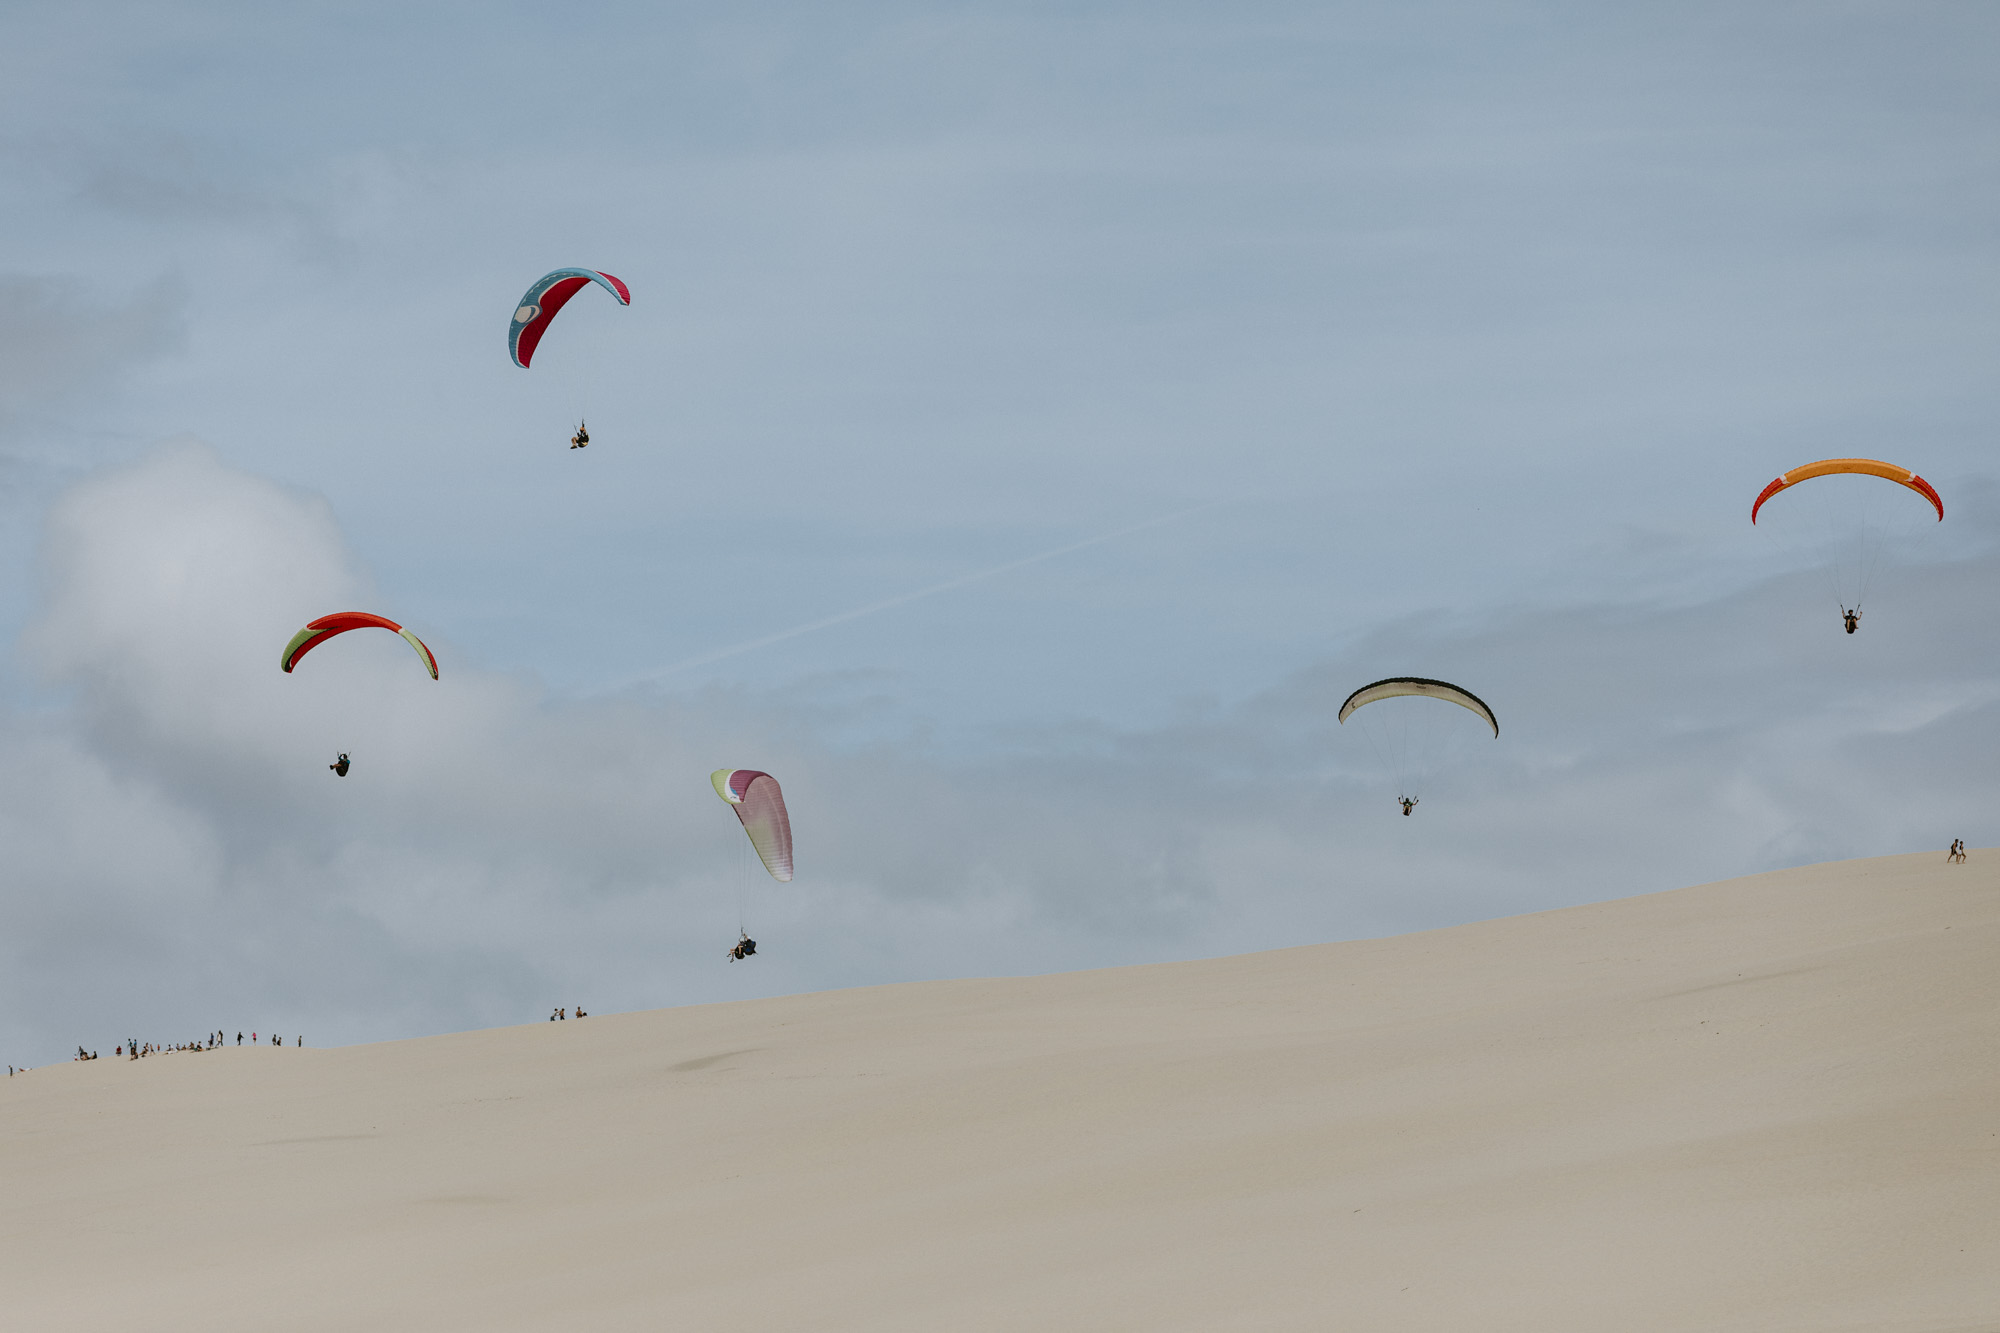 Arcachon wedding photographer: the bay boat is sailing at the botton of Dune du Pyla and all the wedding guests take this opportunity watch the paragliders flirt with the sand